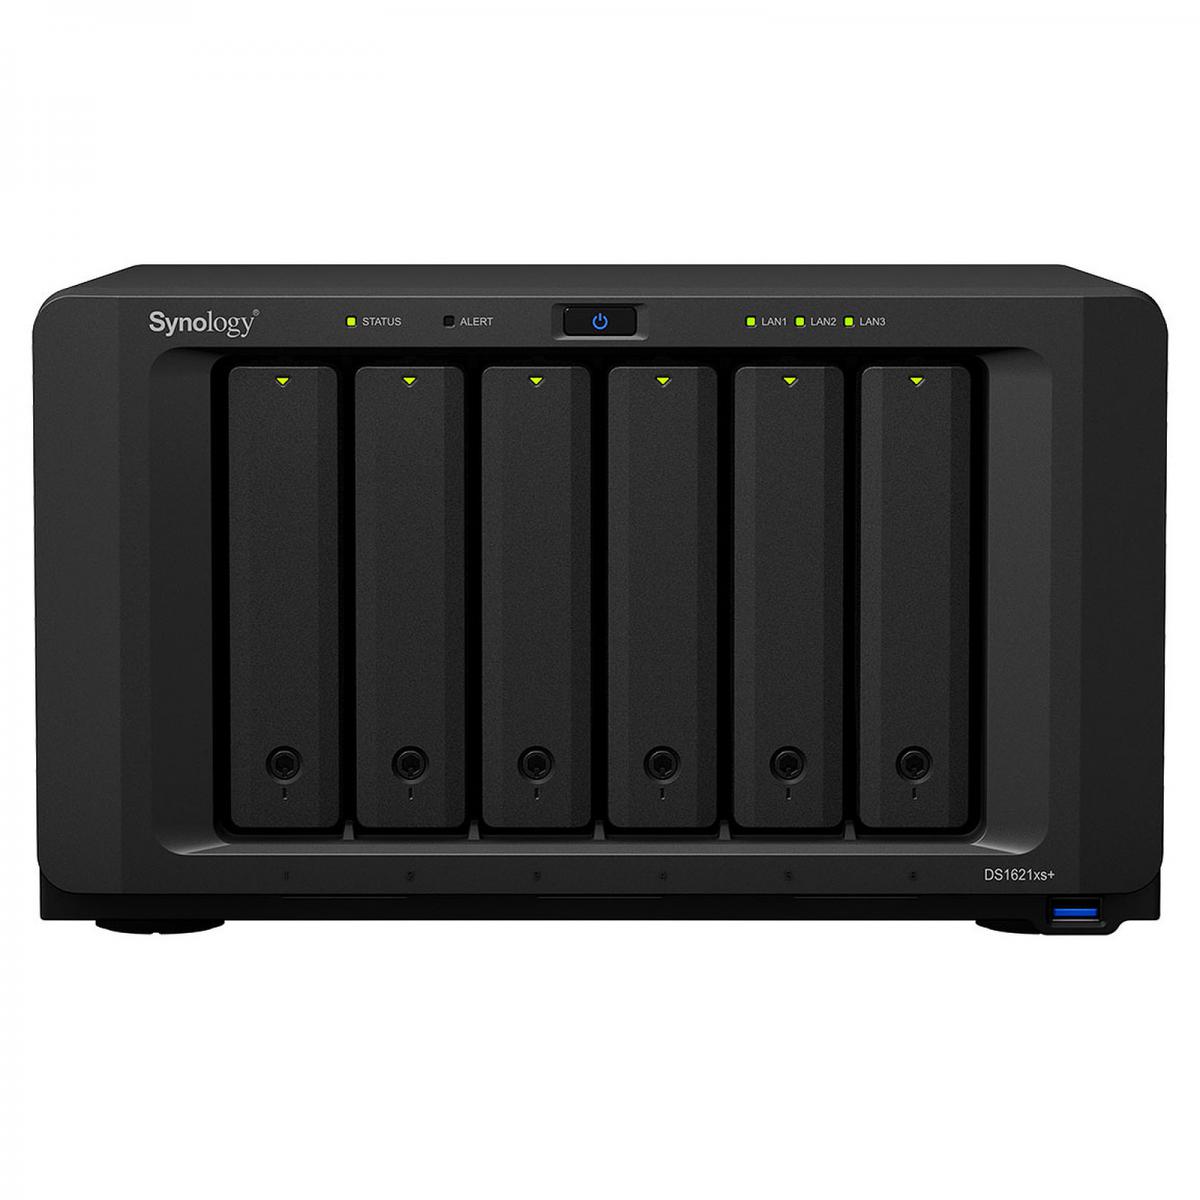 Synology - SYNOLOGY DiskStation DS1621xs+ - NAS